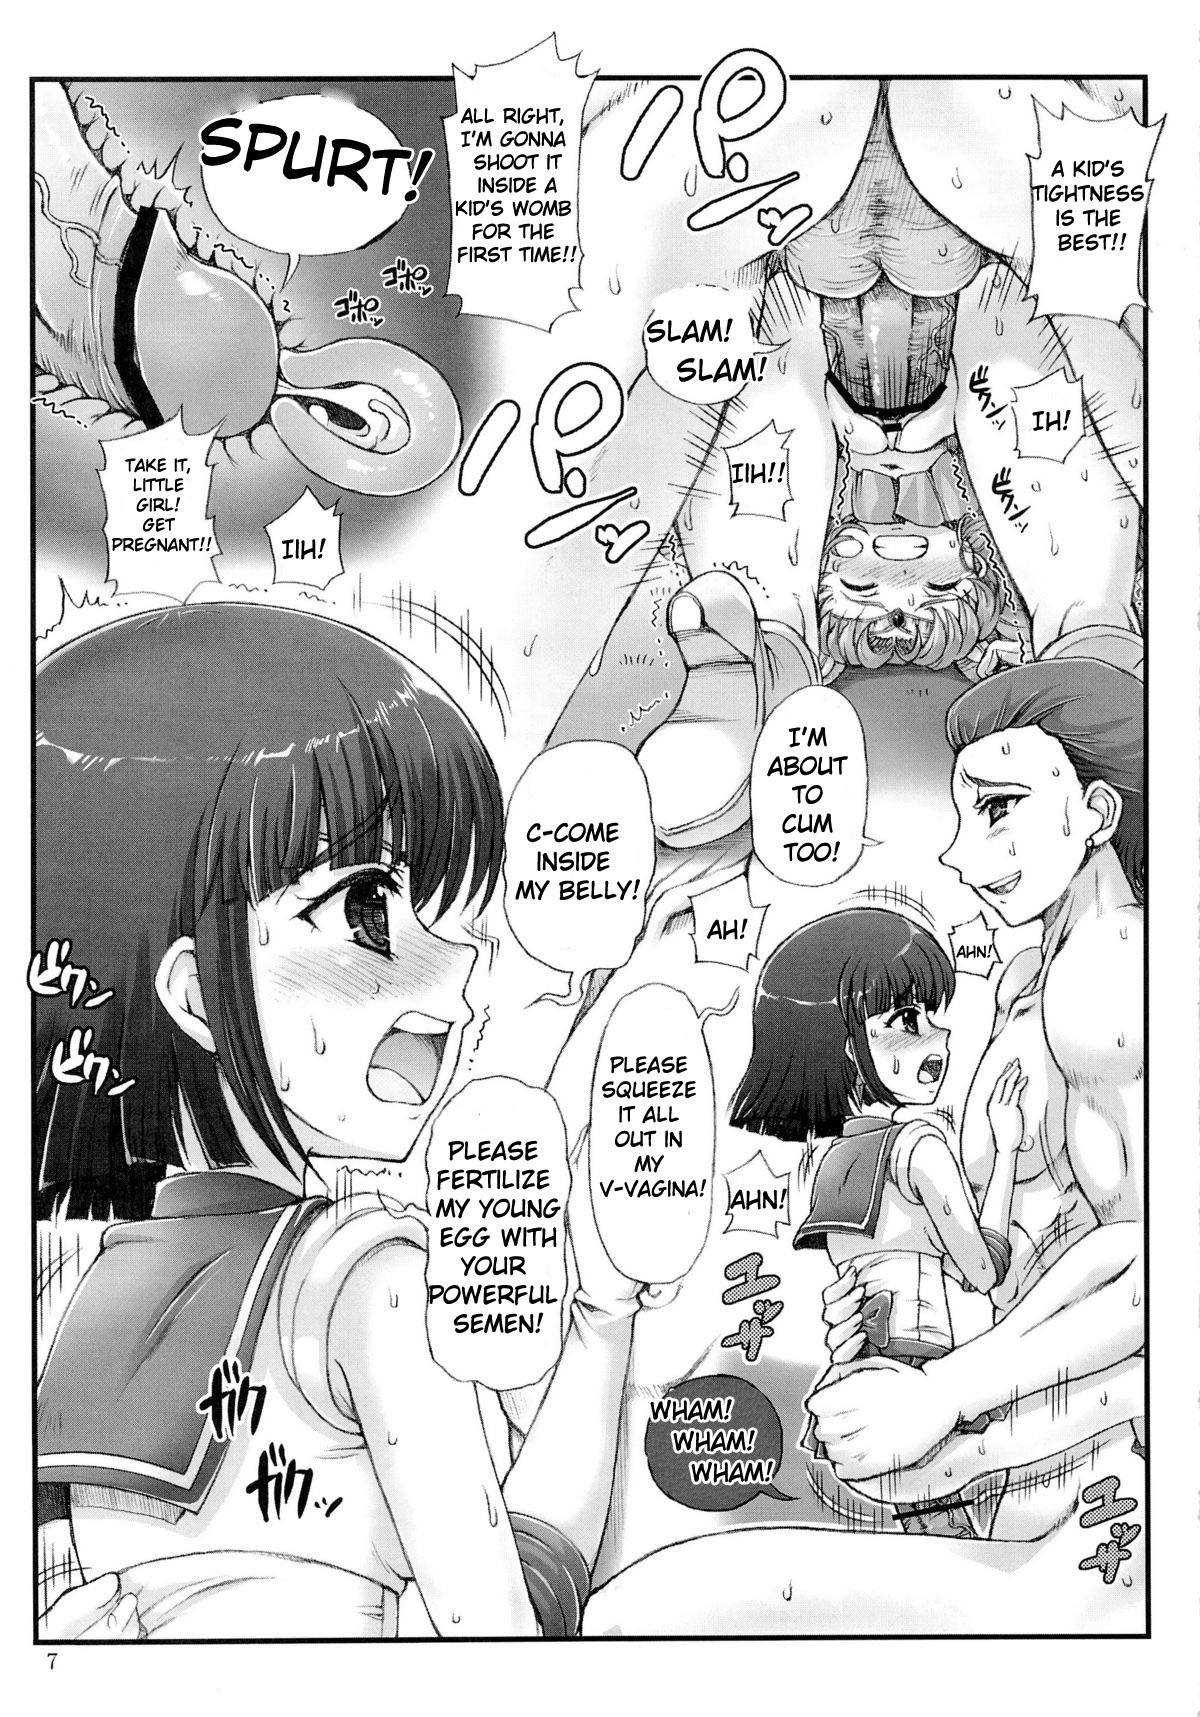 Sailor Delivery Health hentai manga picture 7